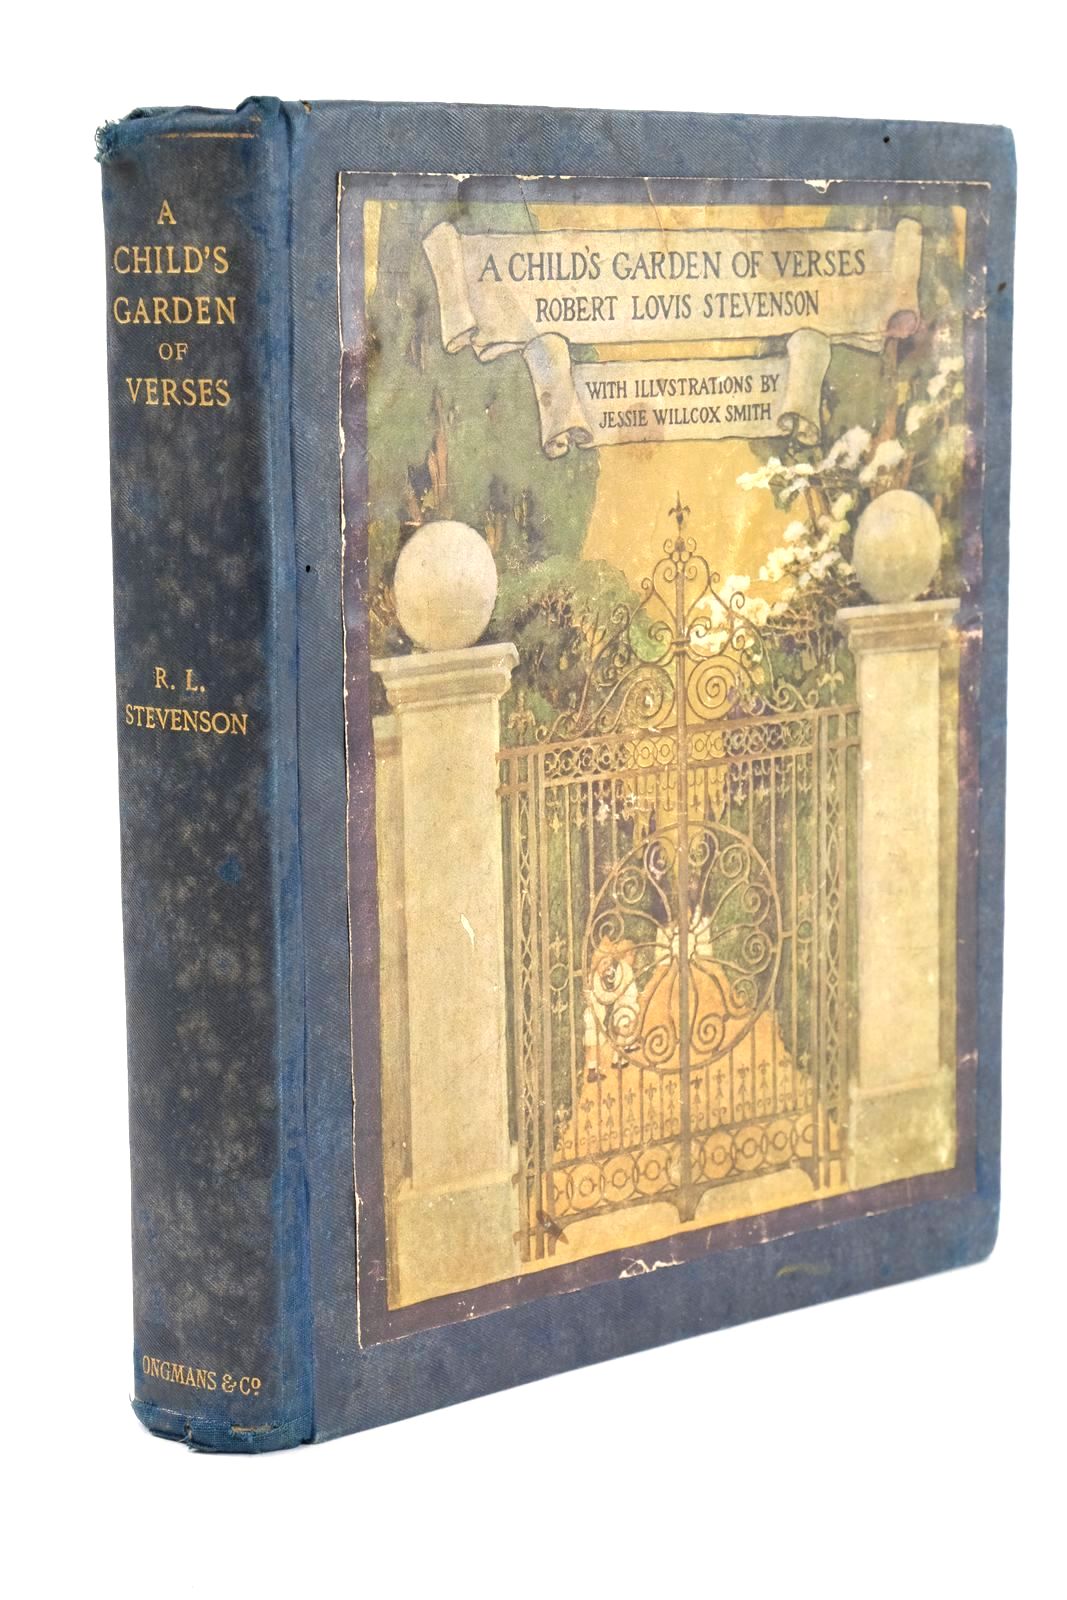 Photo of A CHILD'S GARDEN OF VERSES written by Stevenson, Robert Louis illustrated by Smith, Jessie Willcox published by Longmans, Green & Co. (STOCK CODE: 1324901)  for sale by Stella & Rose's Books